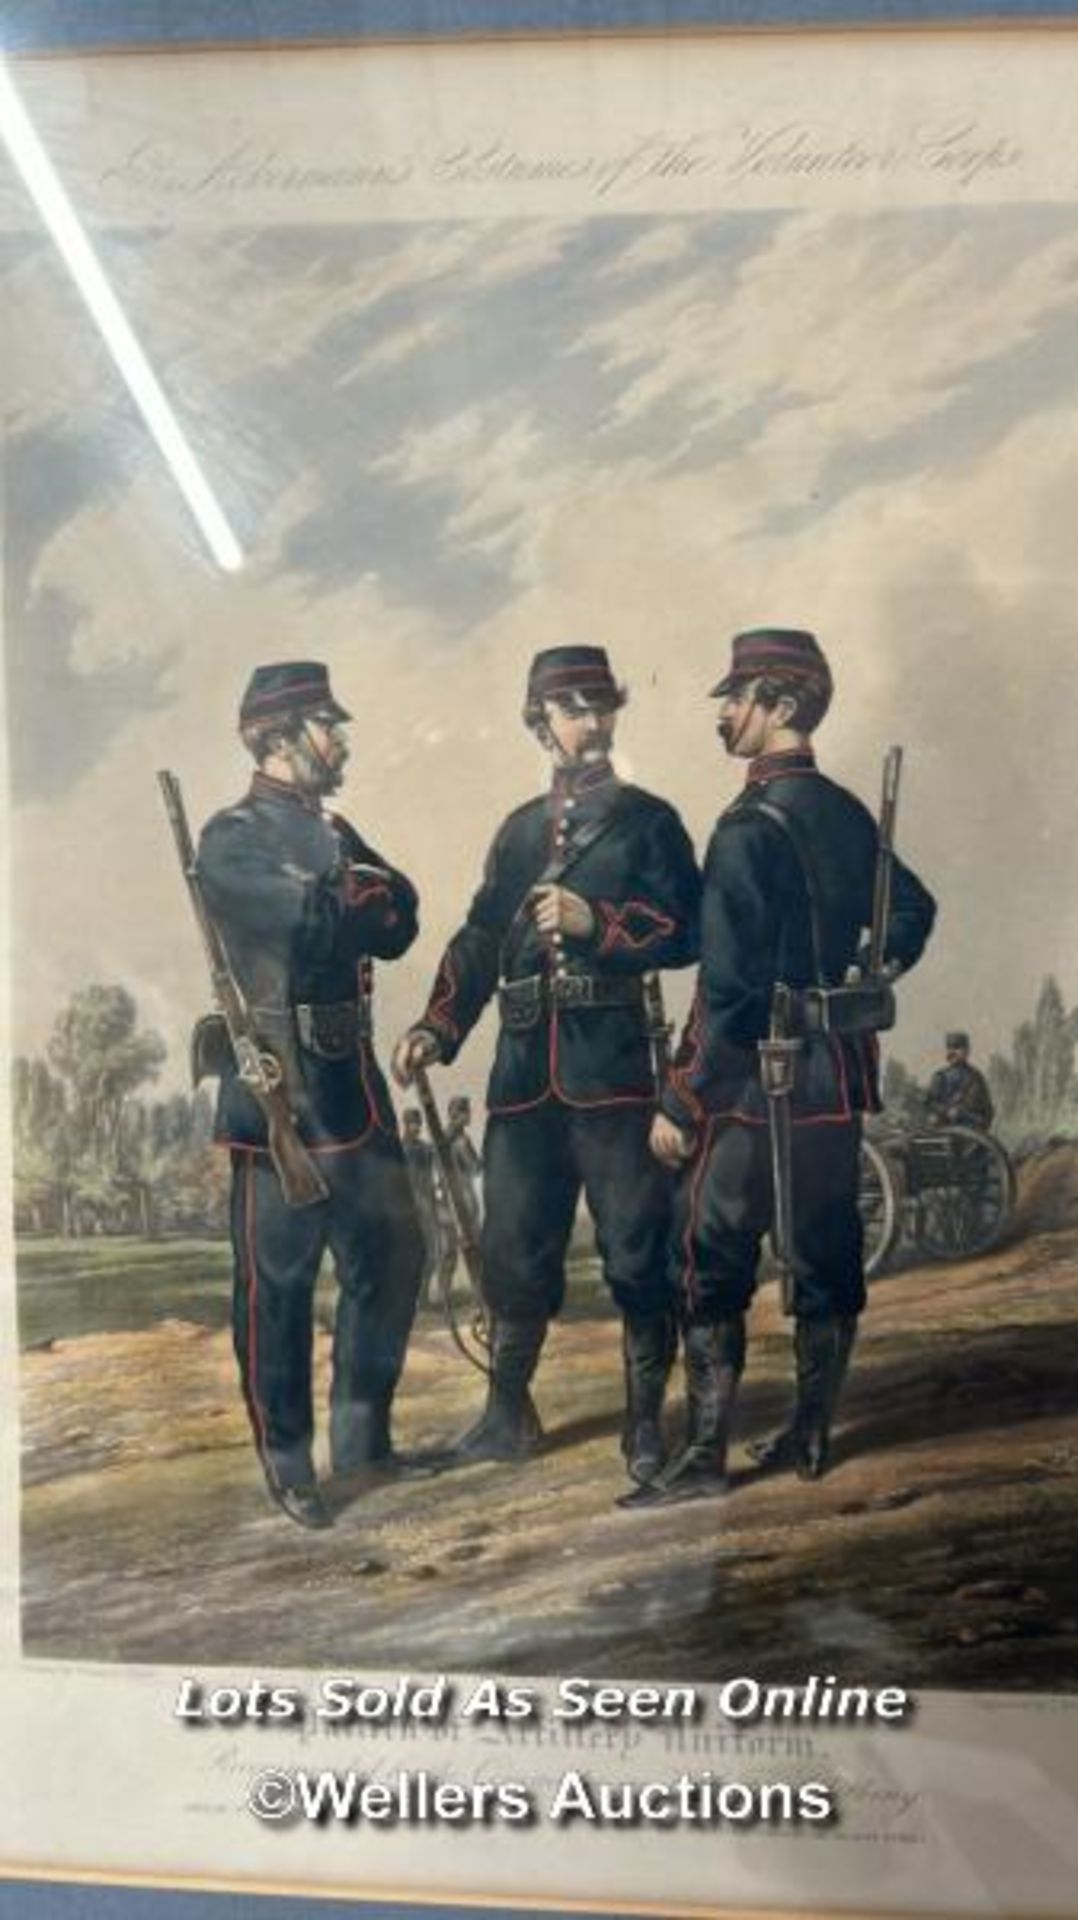 Two framed engravings, drawn by Orlando Norie, engraved by J.Harris featuring military uniforms, - Image 2 of 3